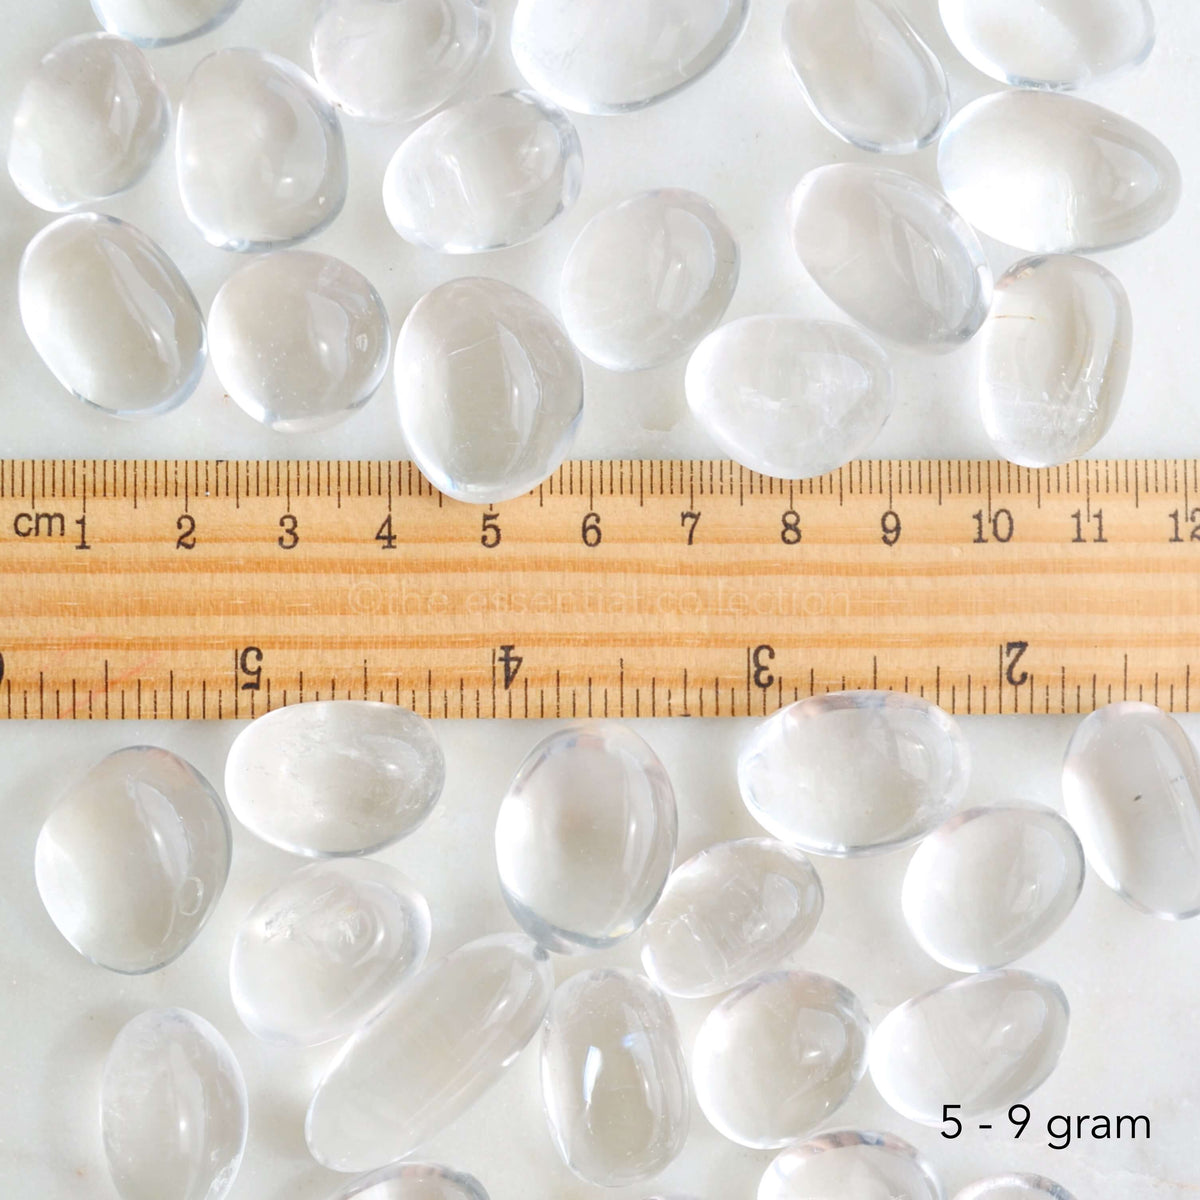 clear quartz tumbled crystals with ruler